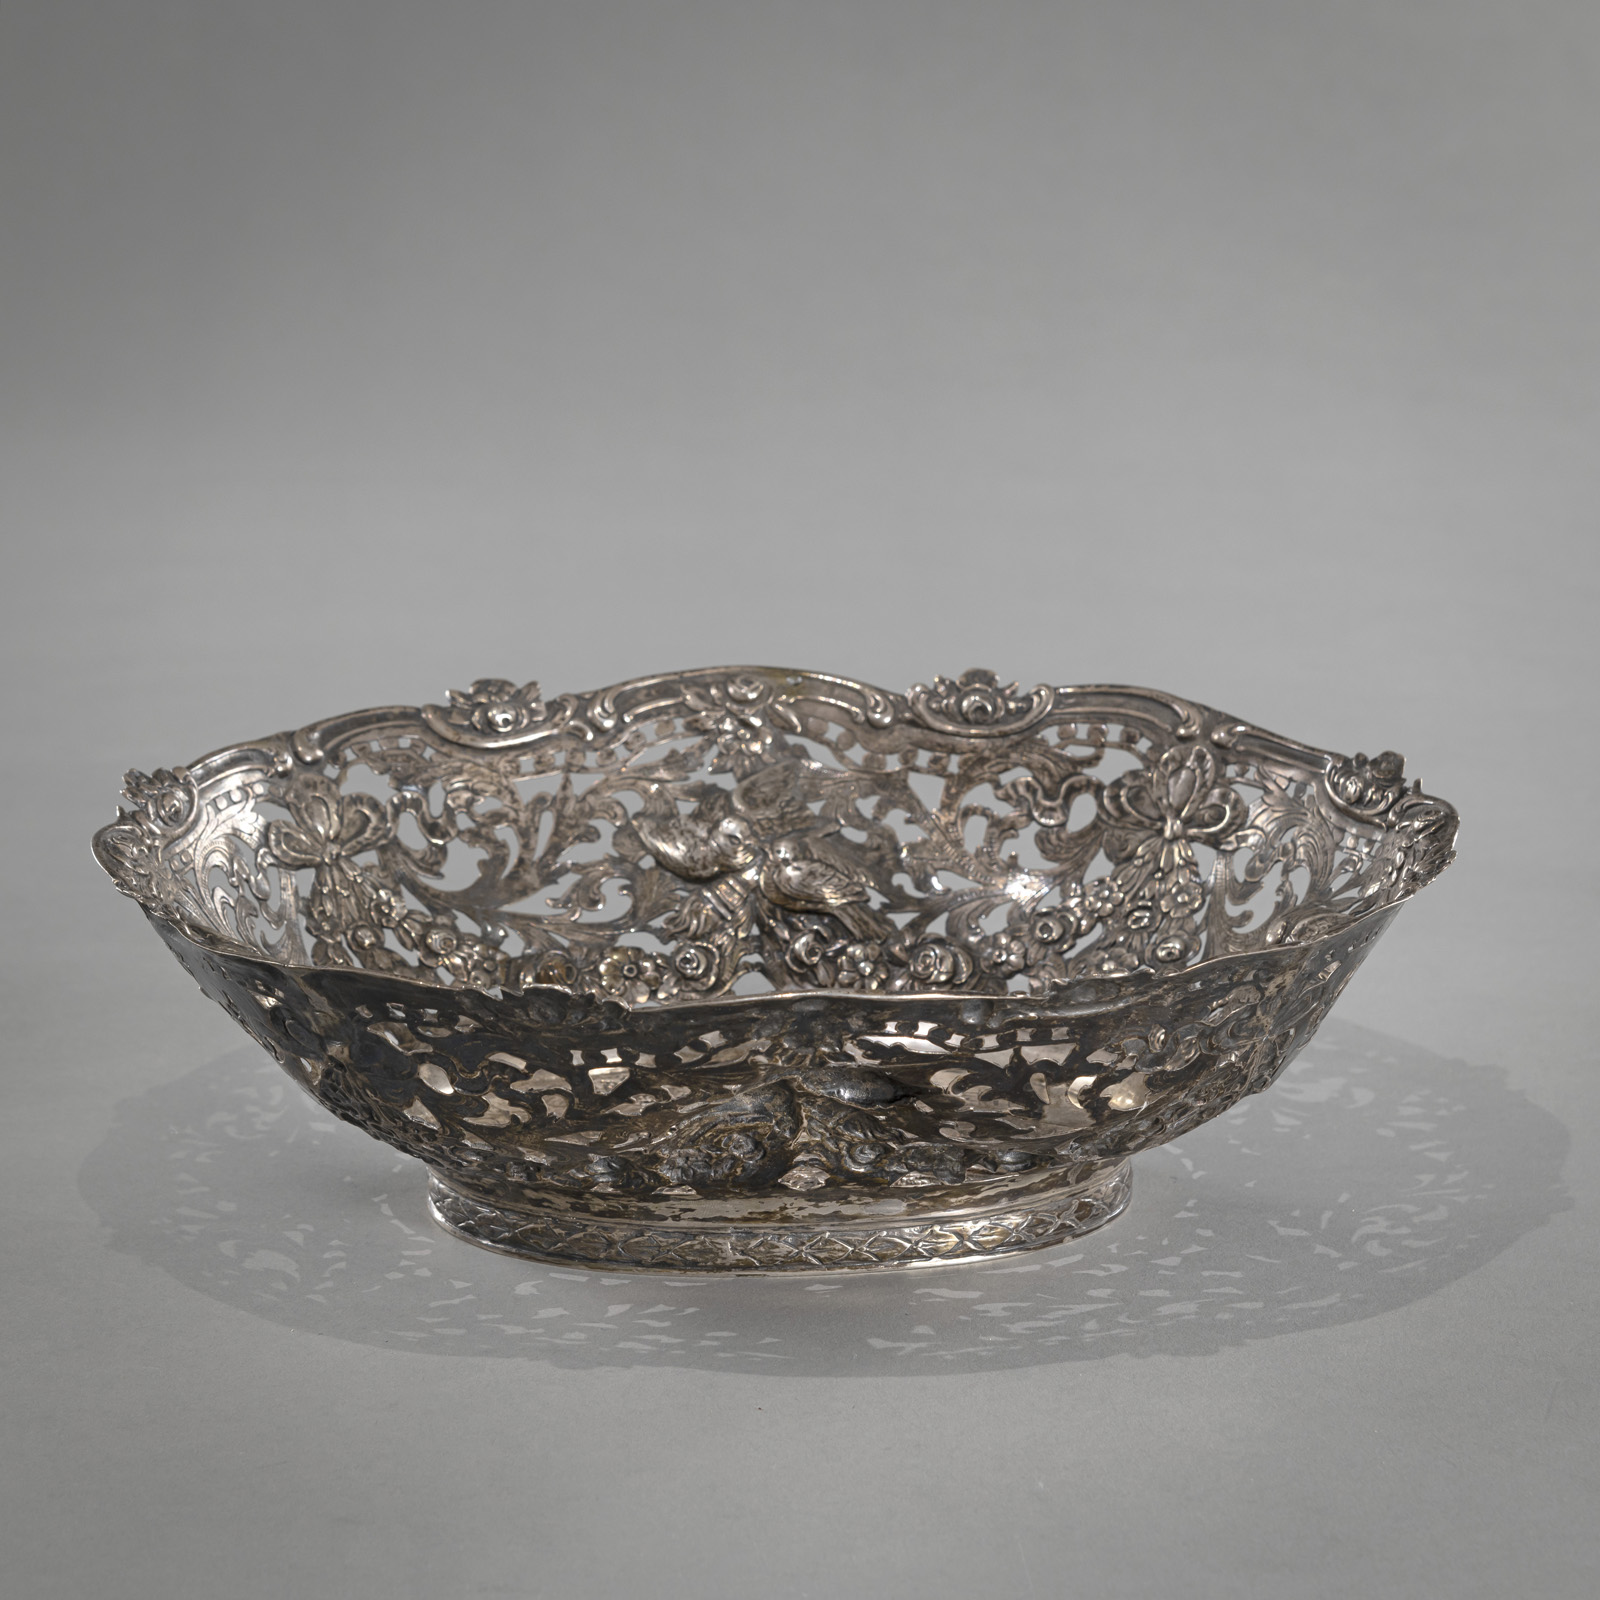 A GERMAN SILVER BASKET WITH PUTTI AND BIRD PATTERN